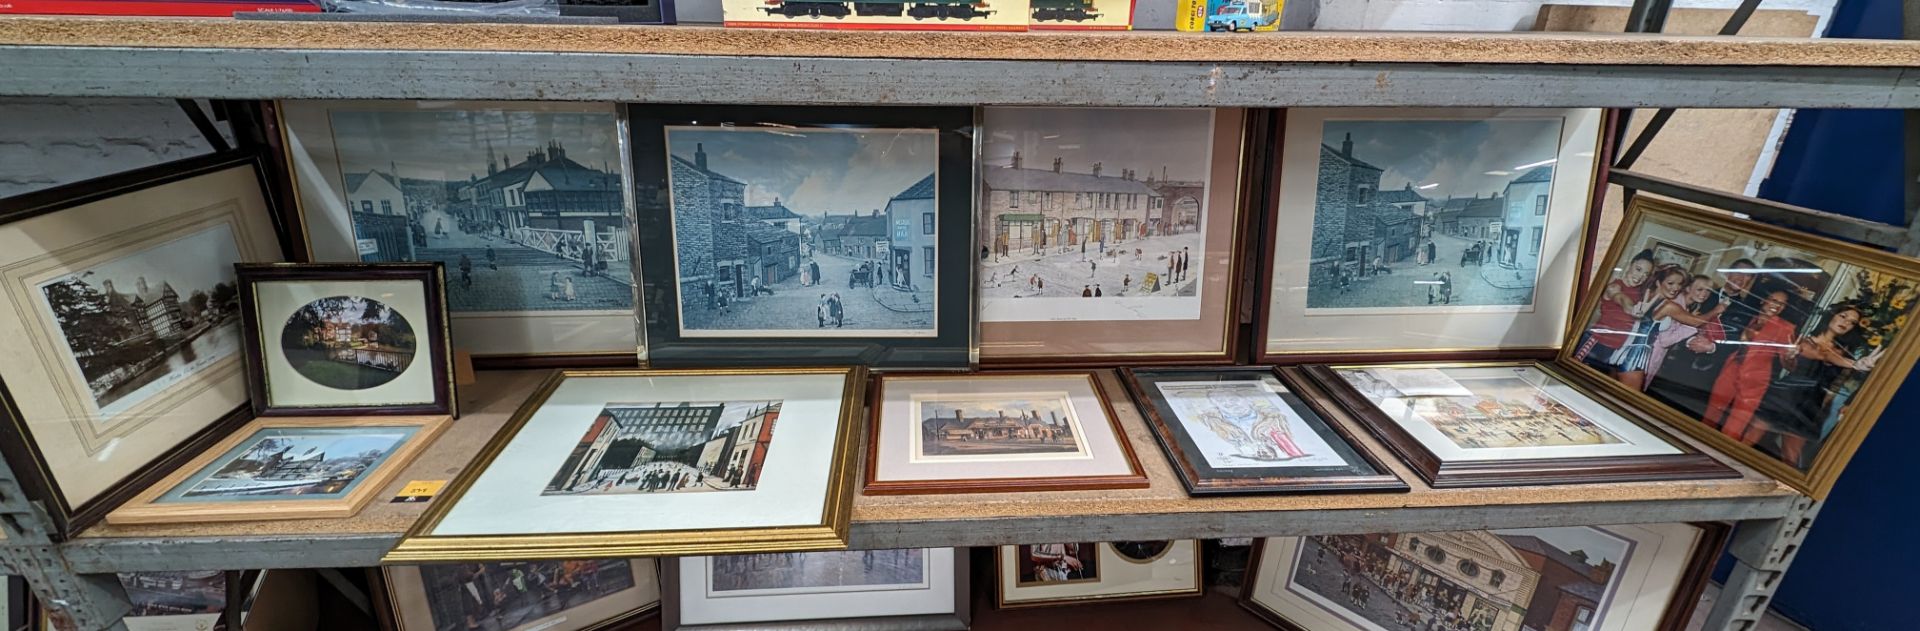 The contents of a bay of framed prints & pictures including reproduction Lowry, vintage photographs, - Image 2 of 14